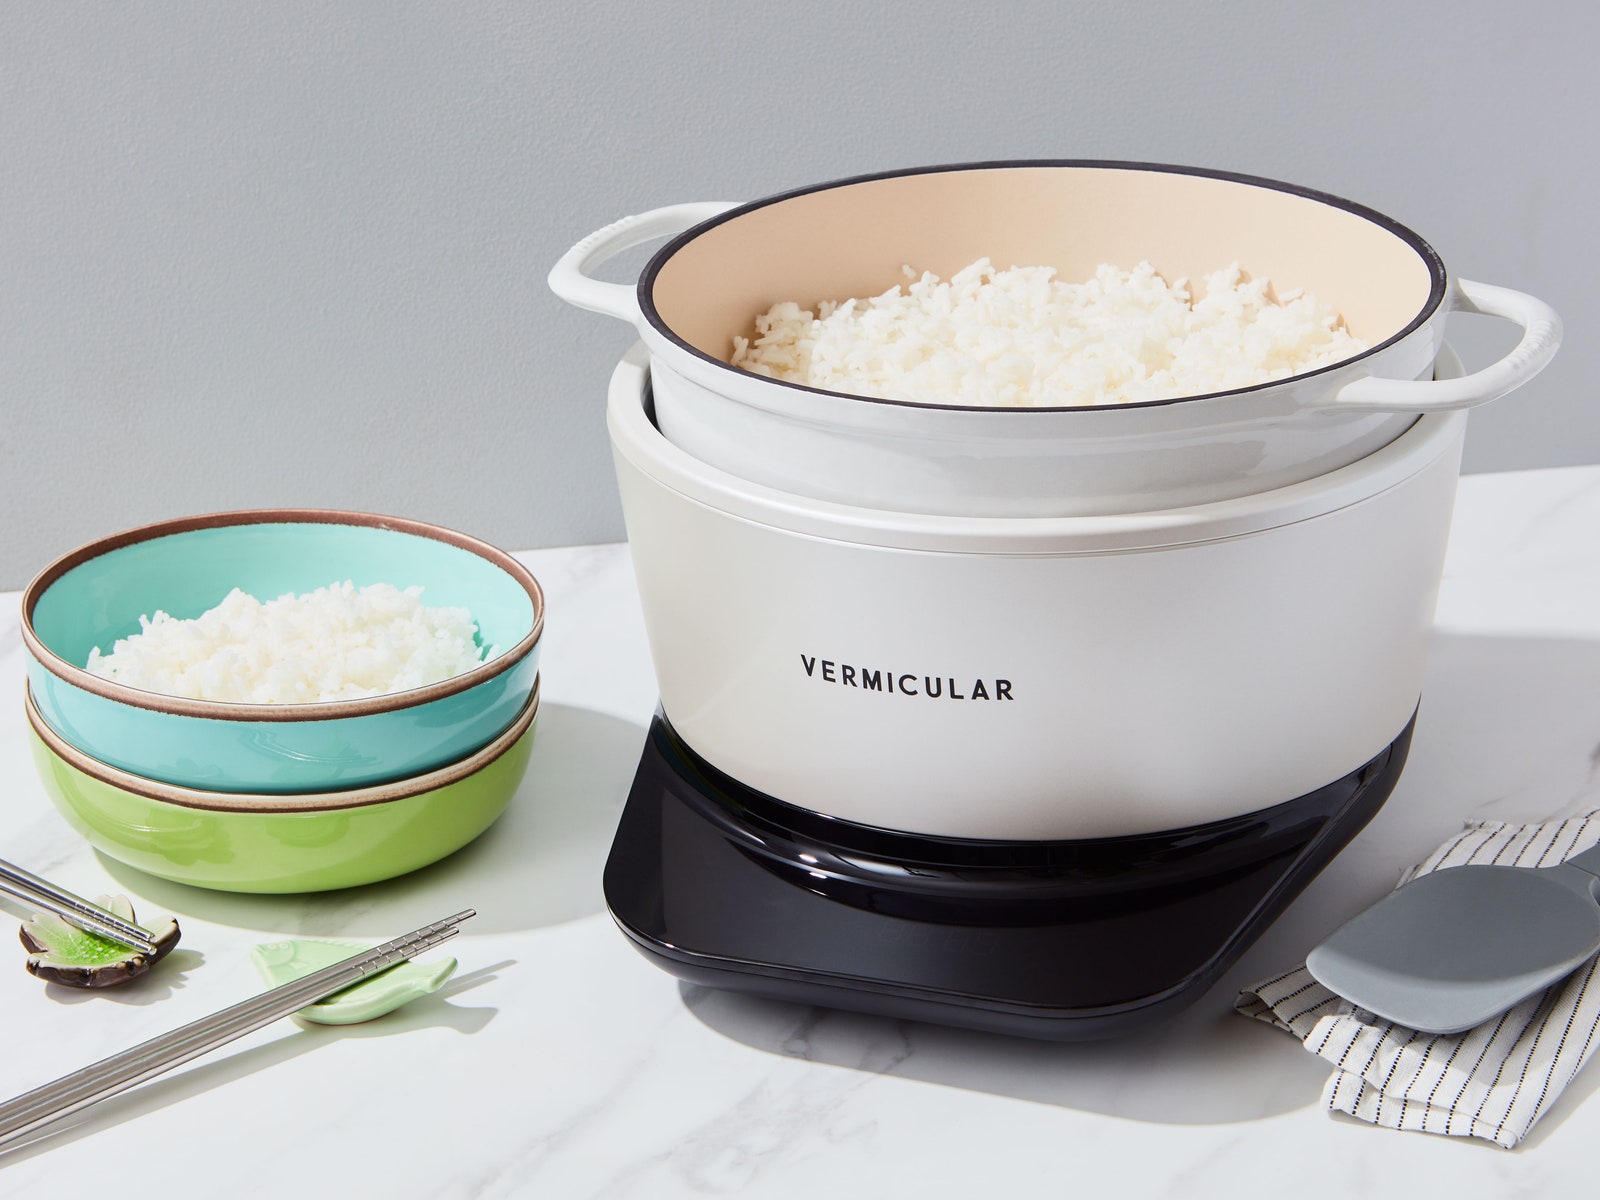 An Electric Dutch Oven Is a New-Old Way to Cook Almost Anything